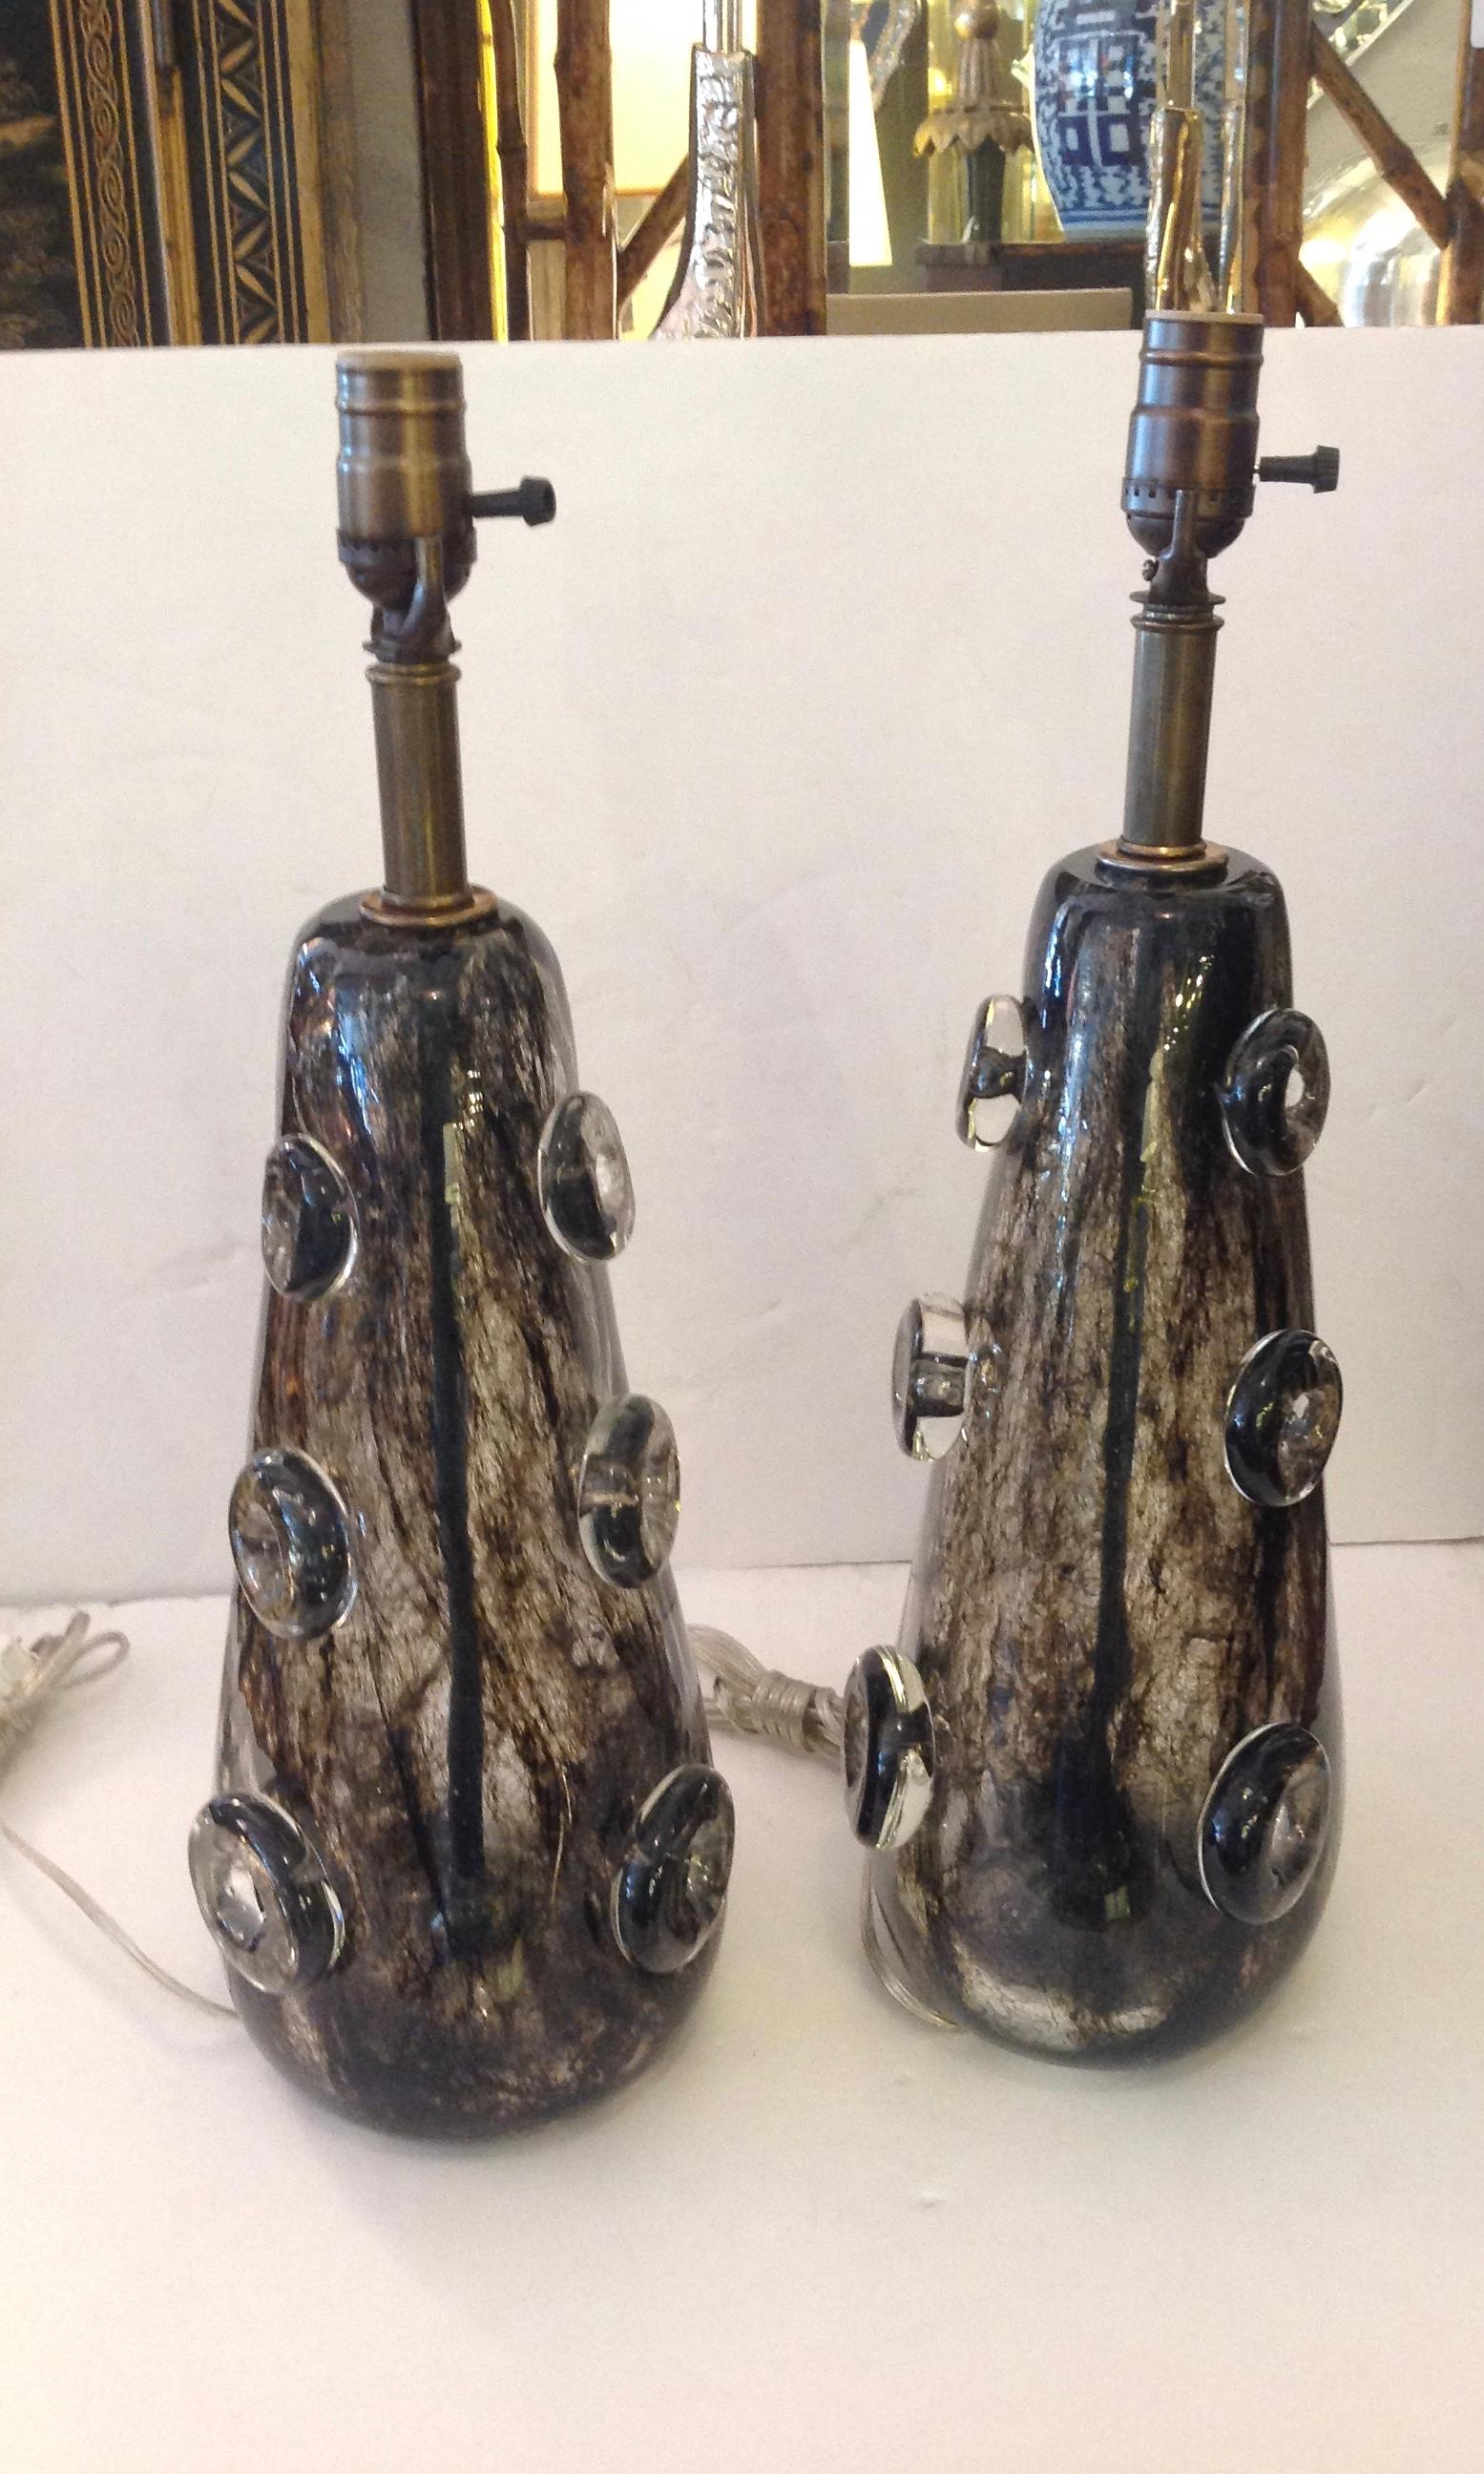 20th Century Rare Pair of Ercole Barovier Crepuscolo Glass Lamps